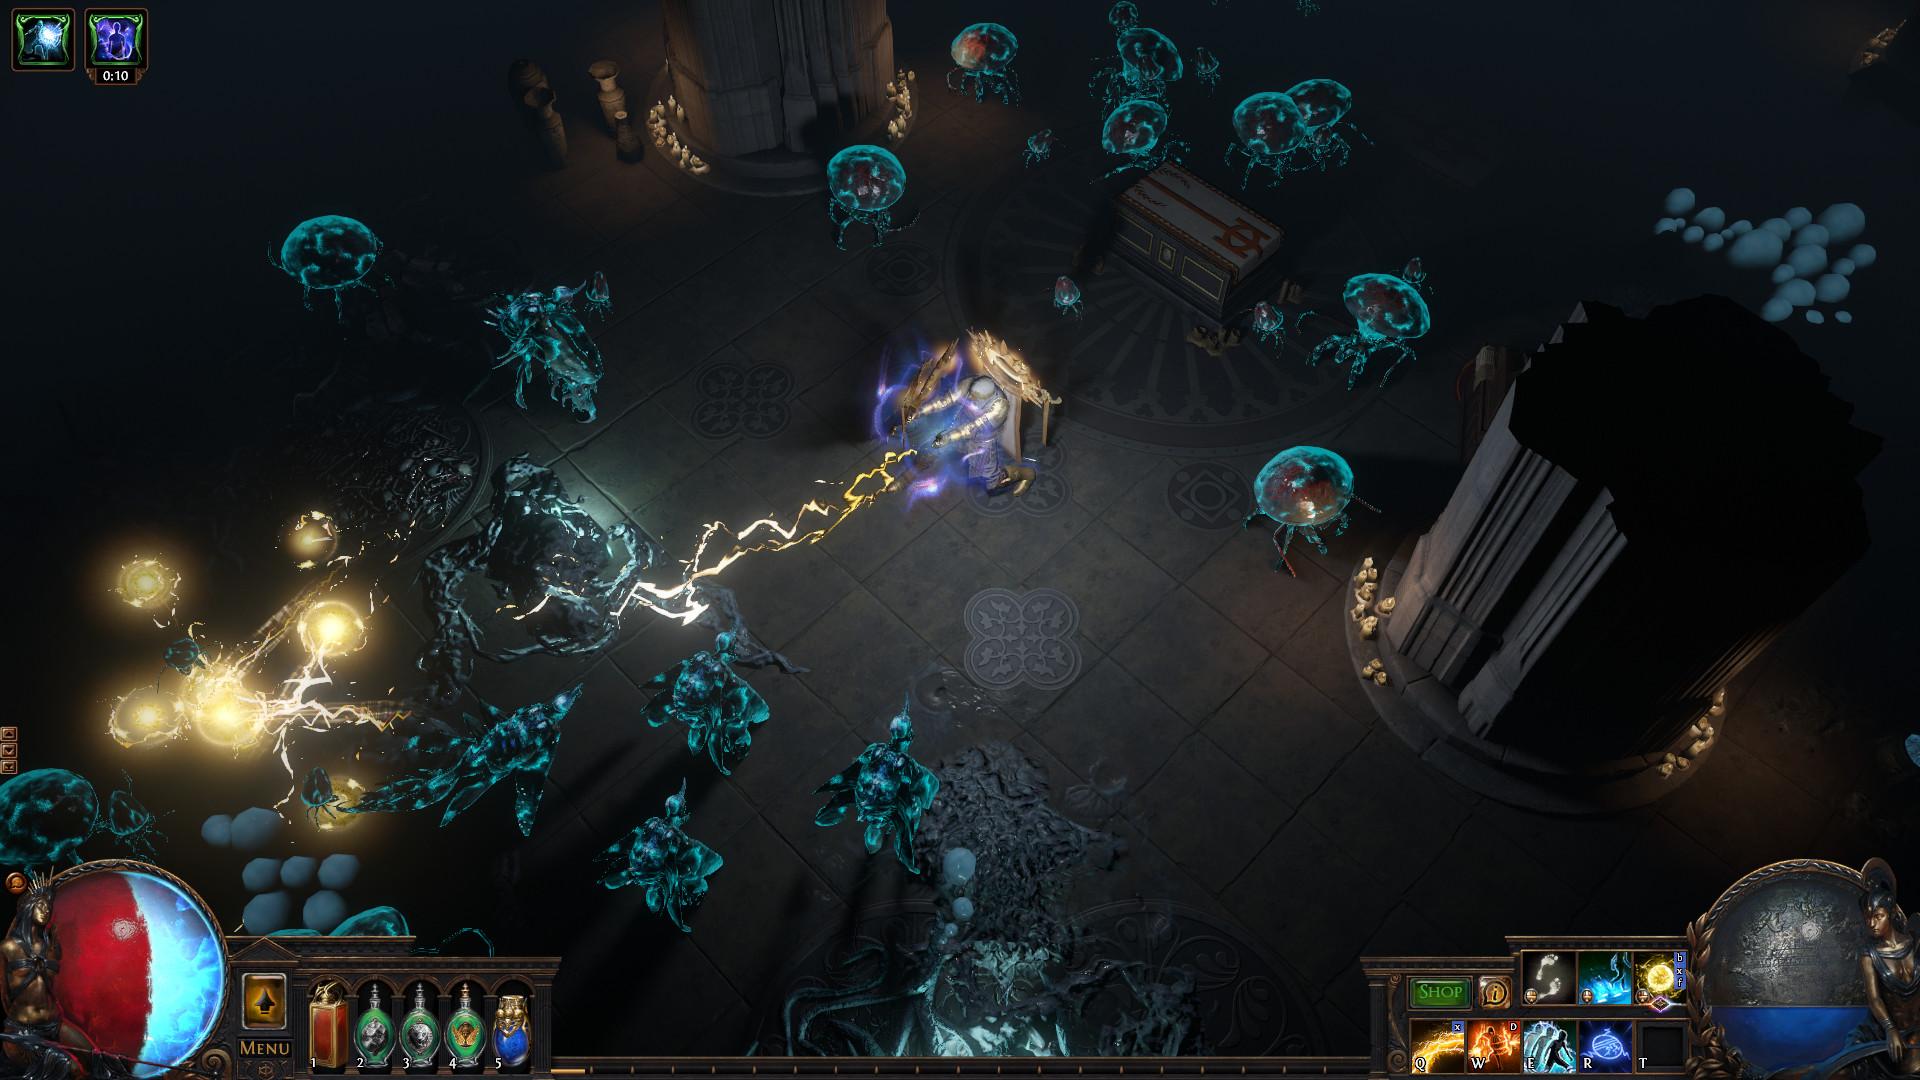 Screenshot №8 from game Path of Exile